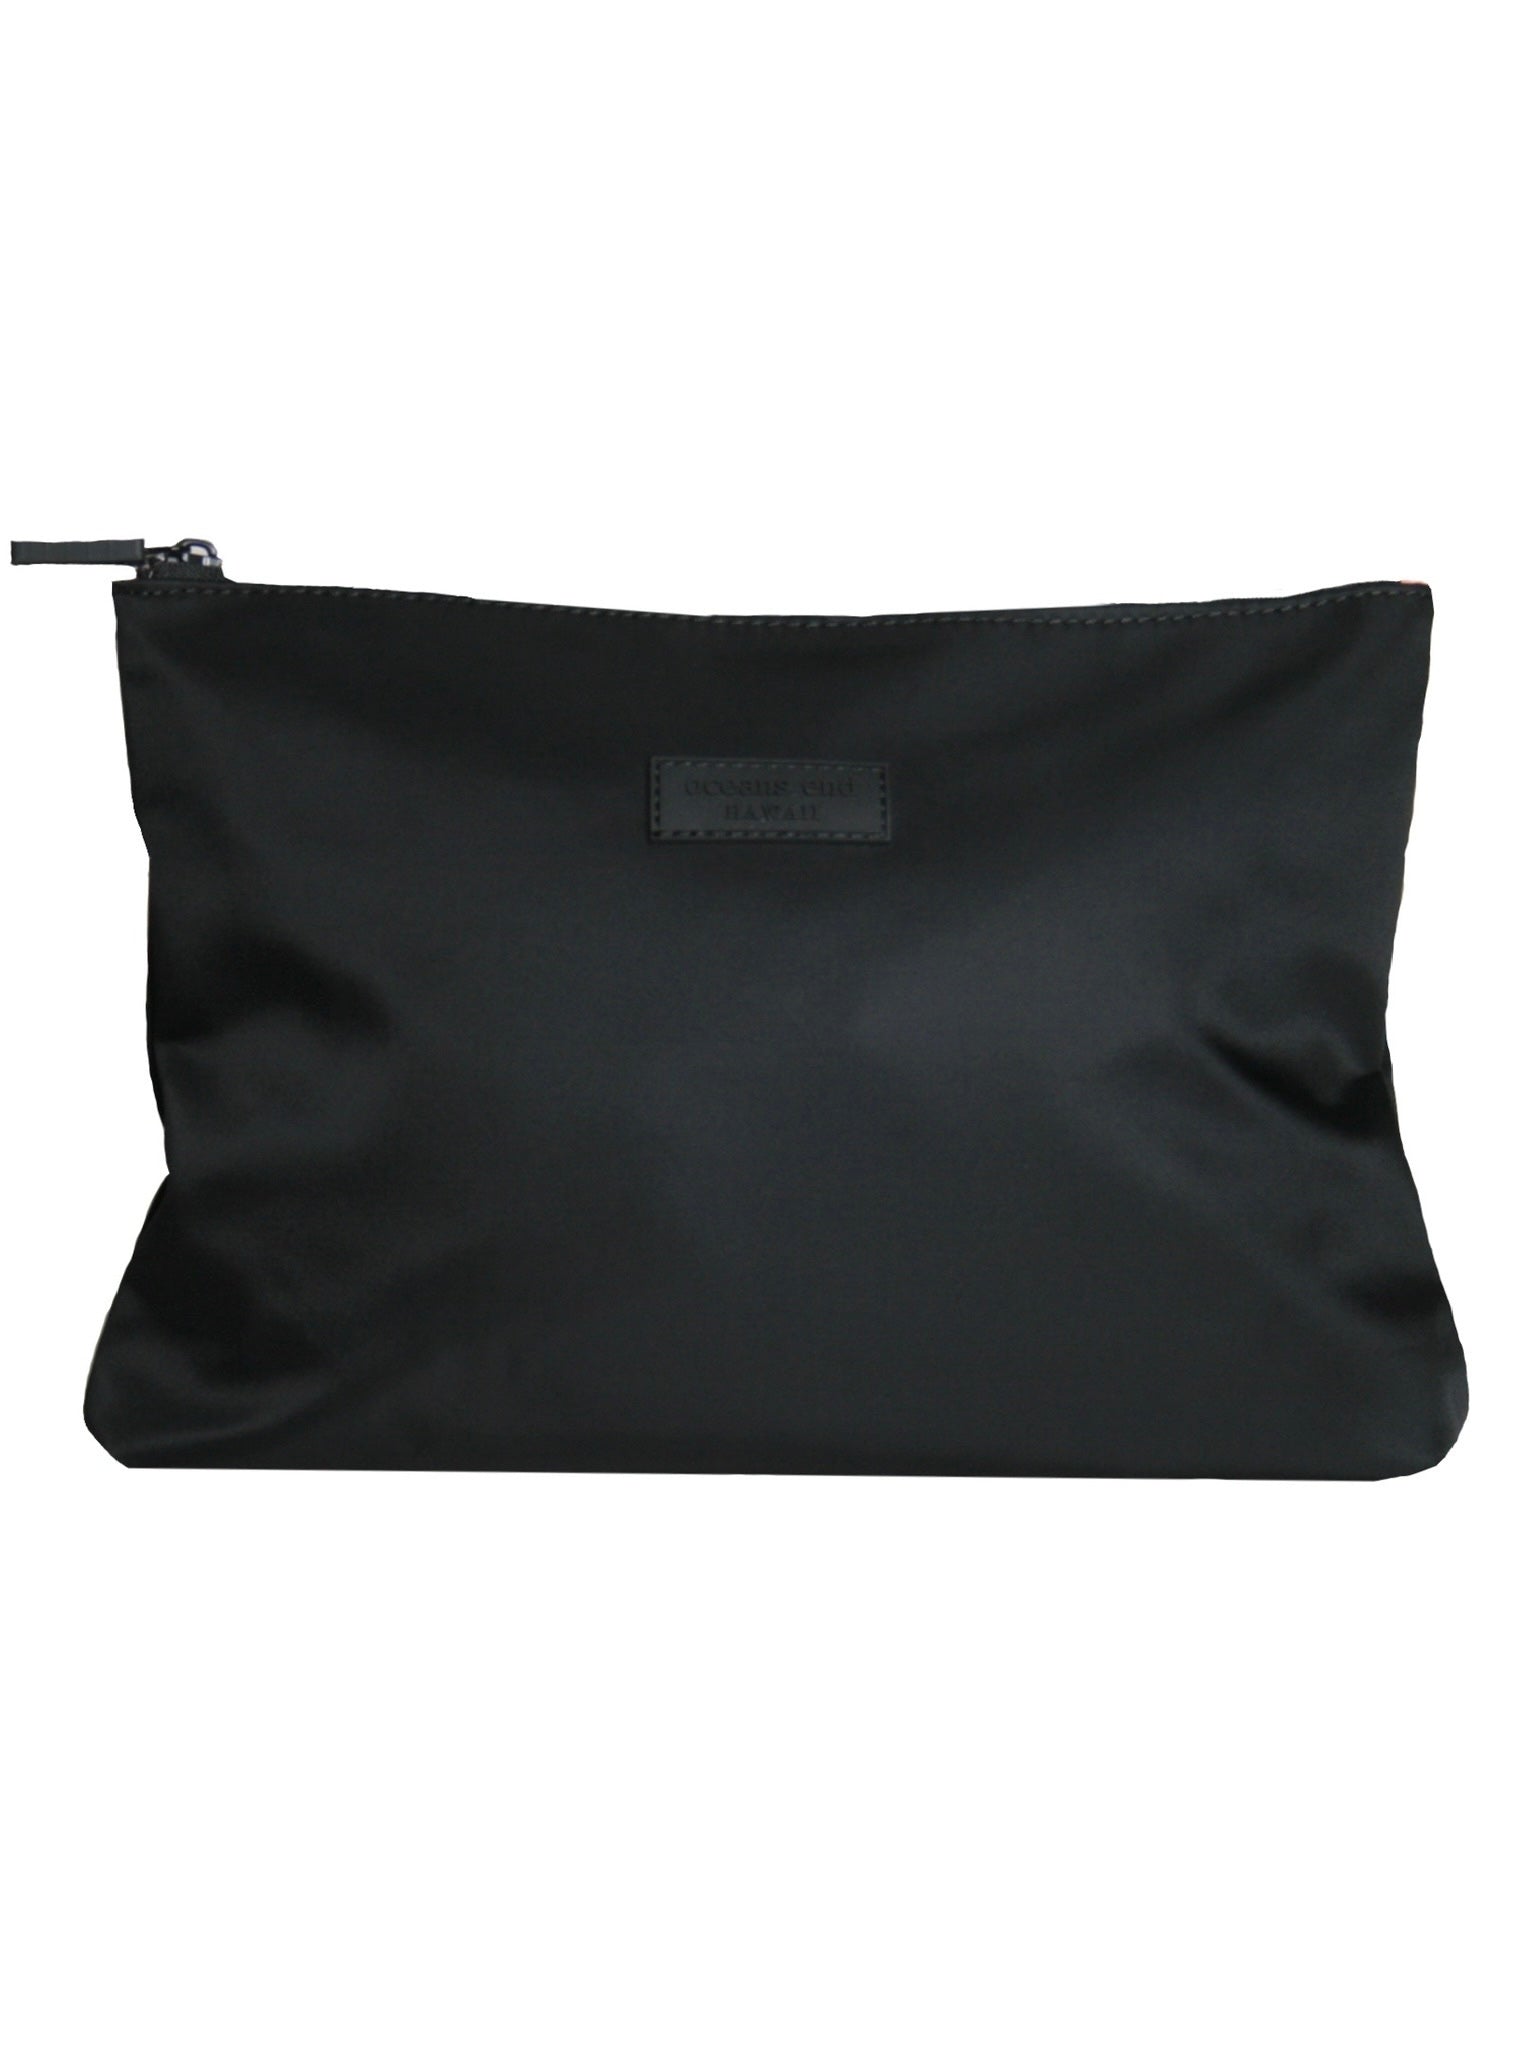 black zippered pouch with black hardware - Oceans End